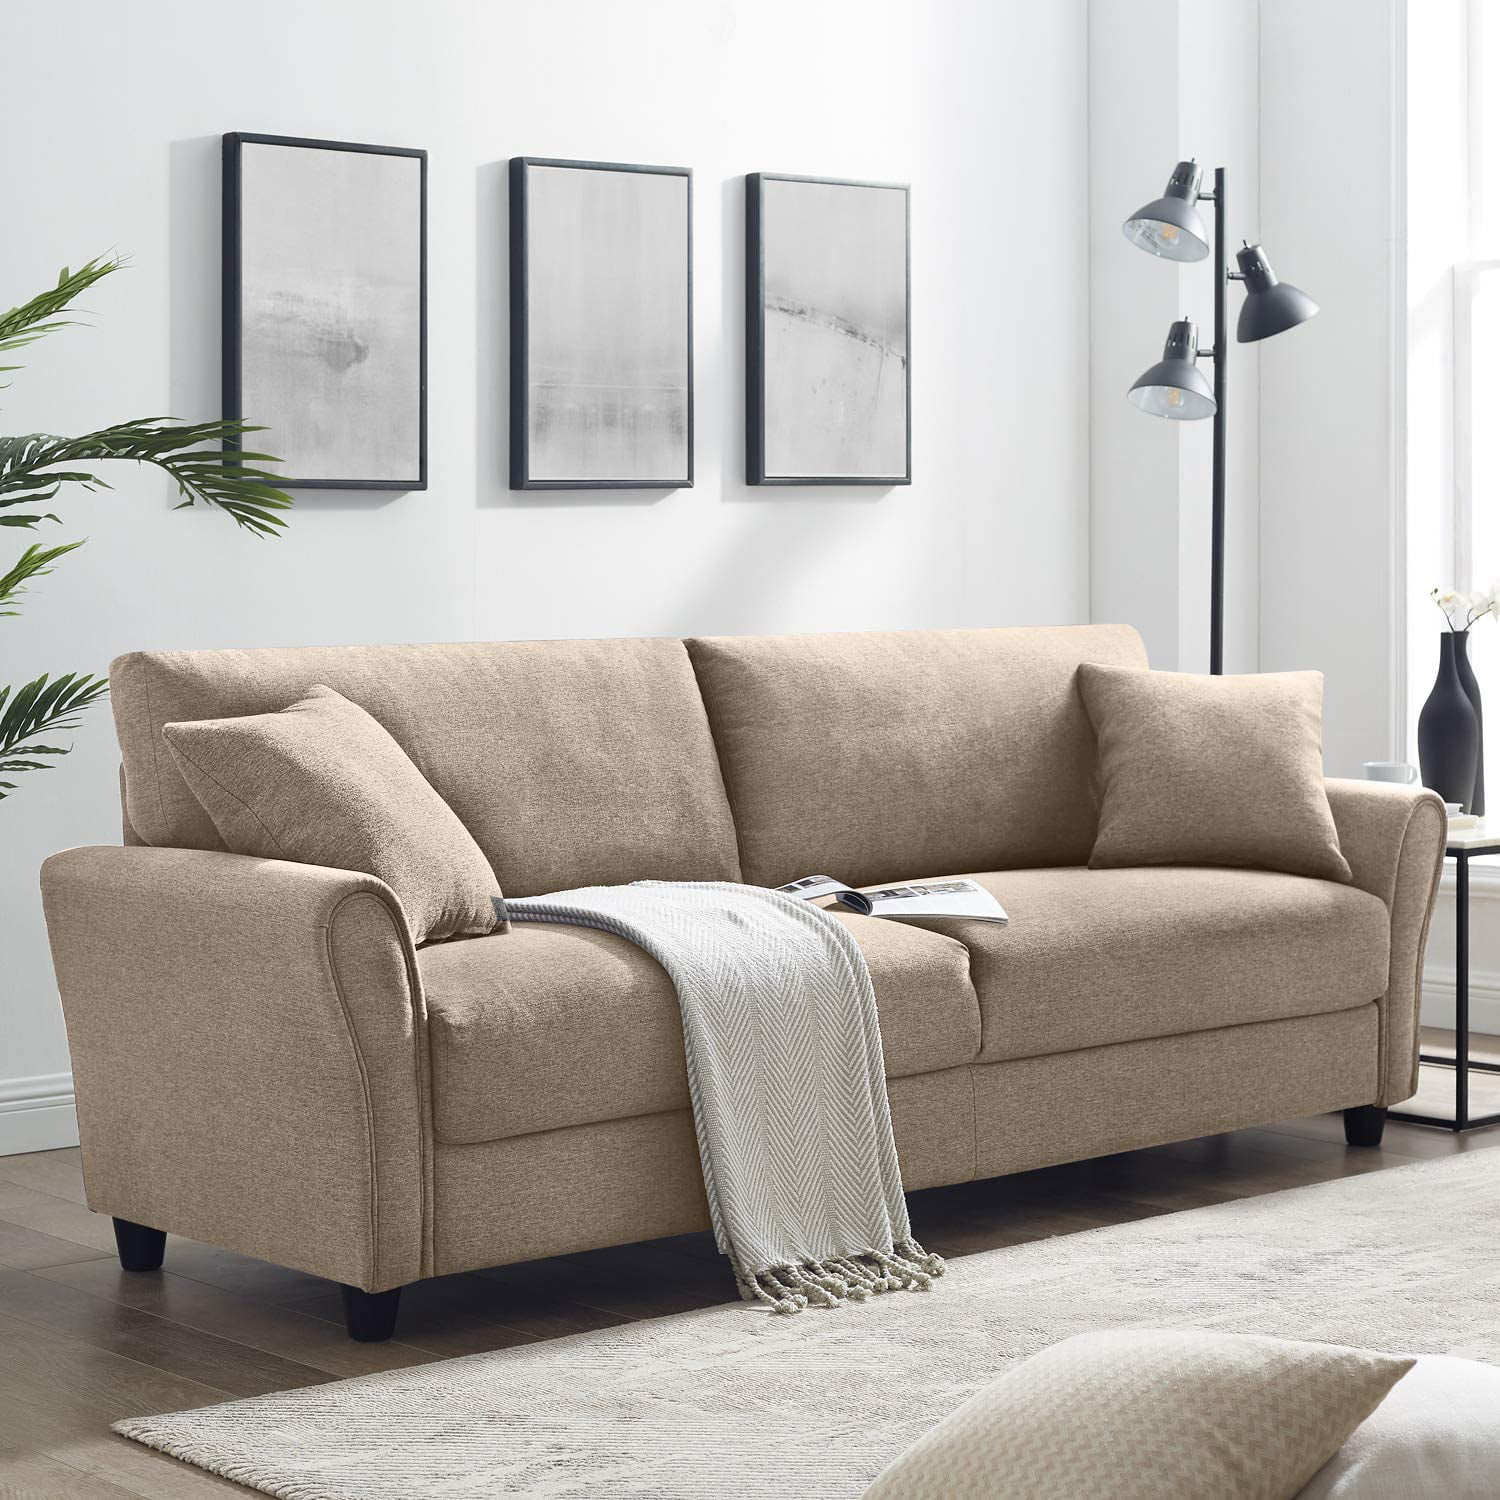 Tribesigns 85 Inch Couch Sofa, Modern Comfortable Upholstered Linen